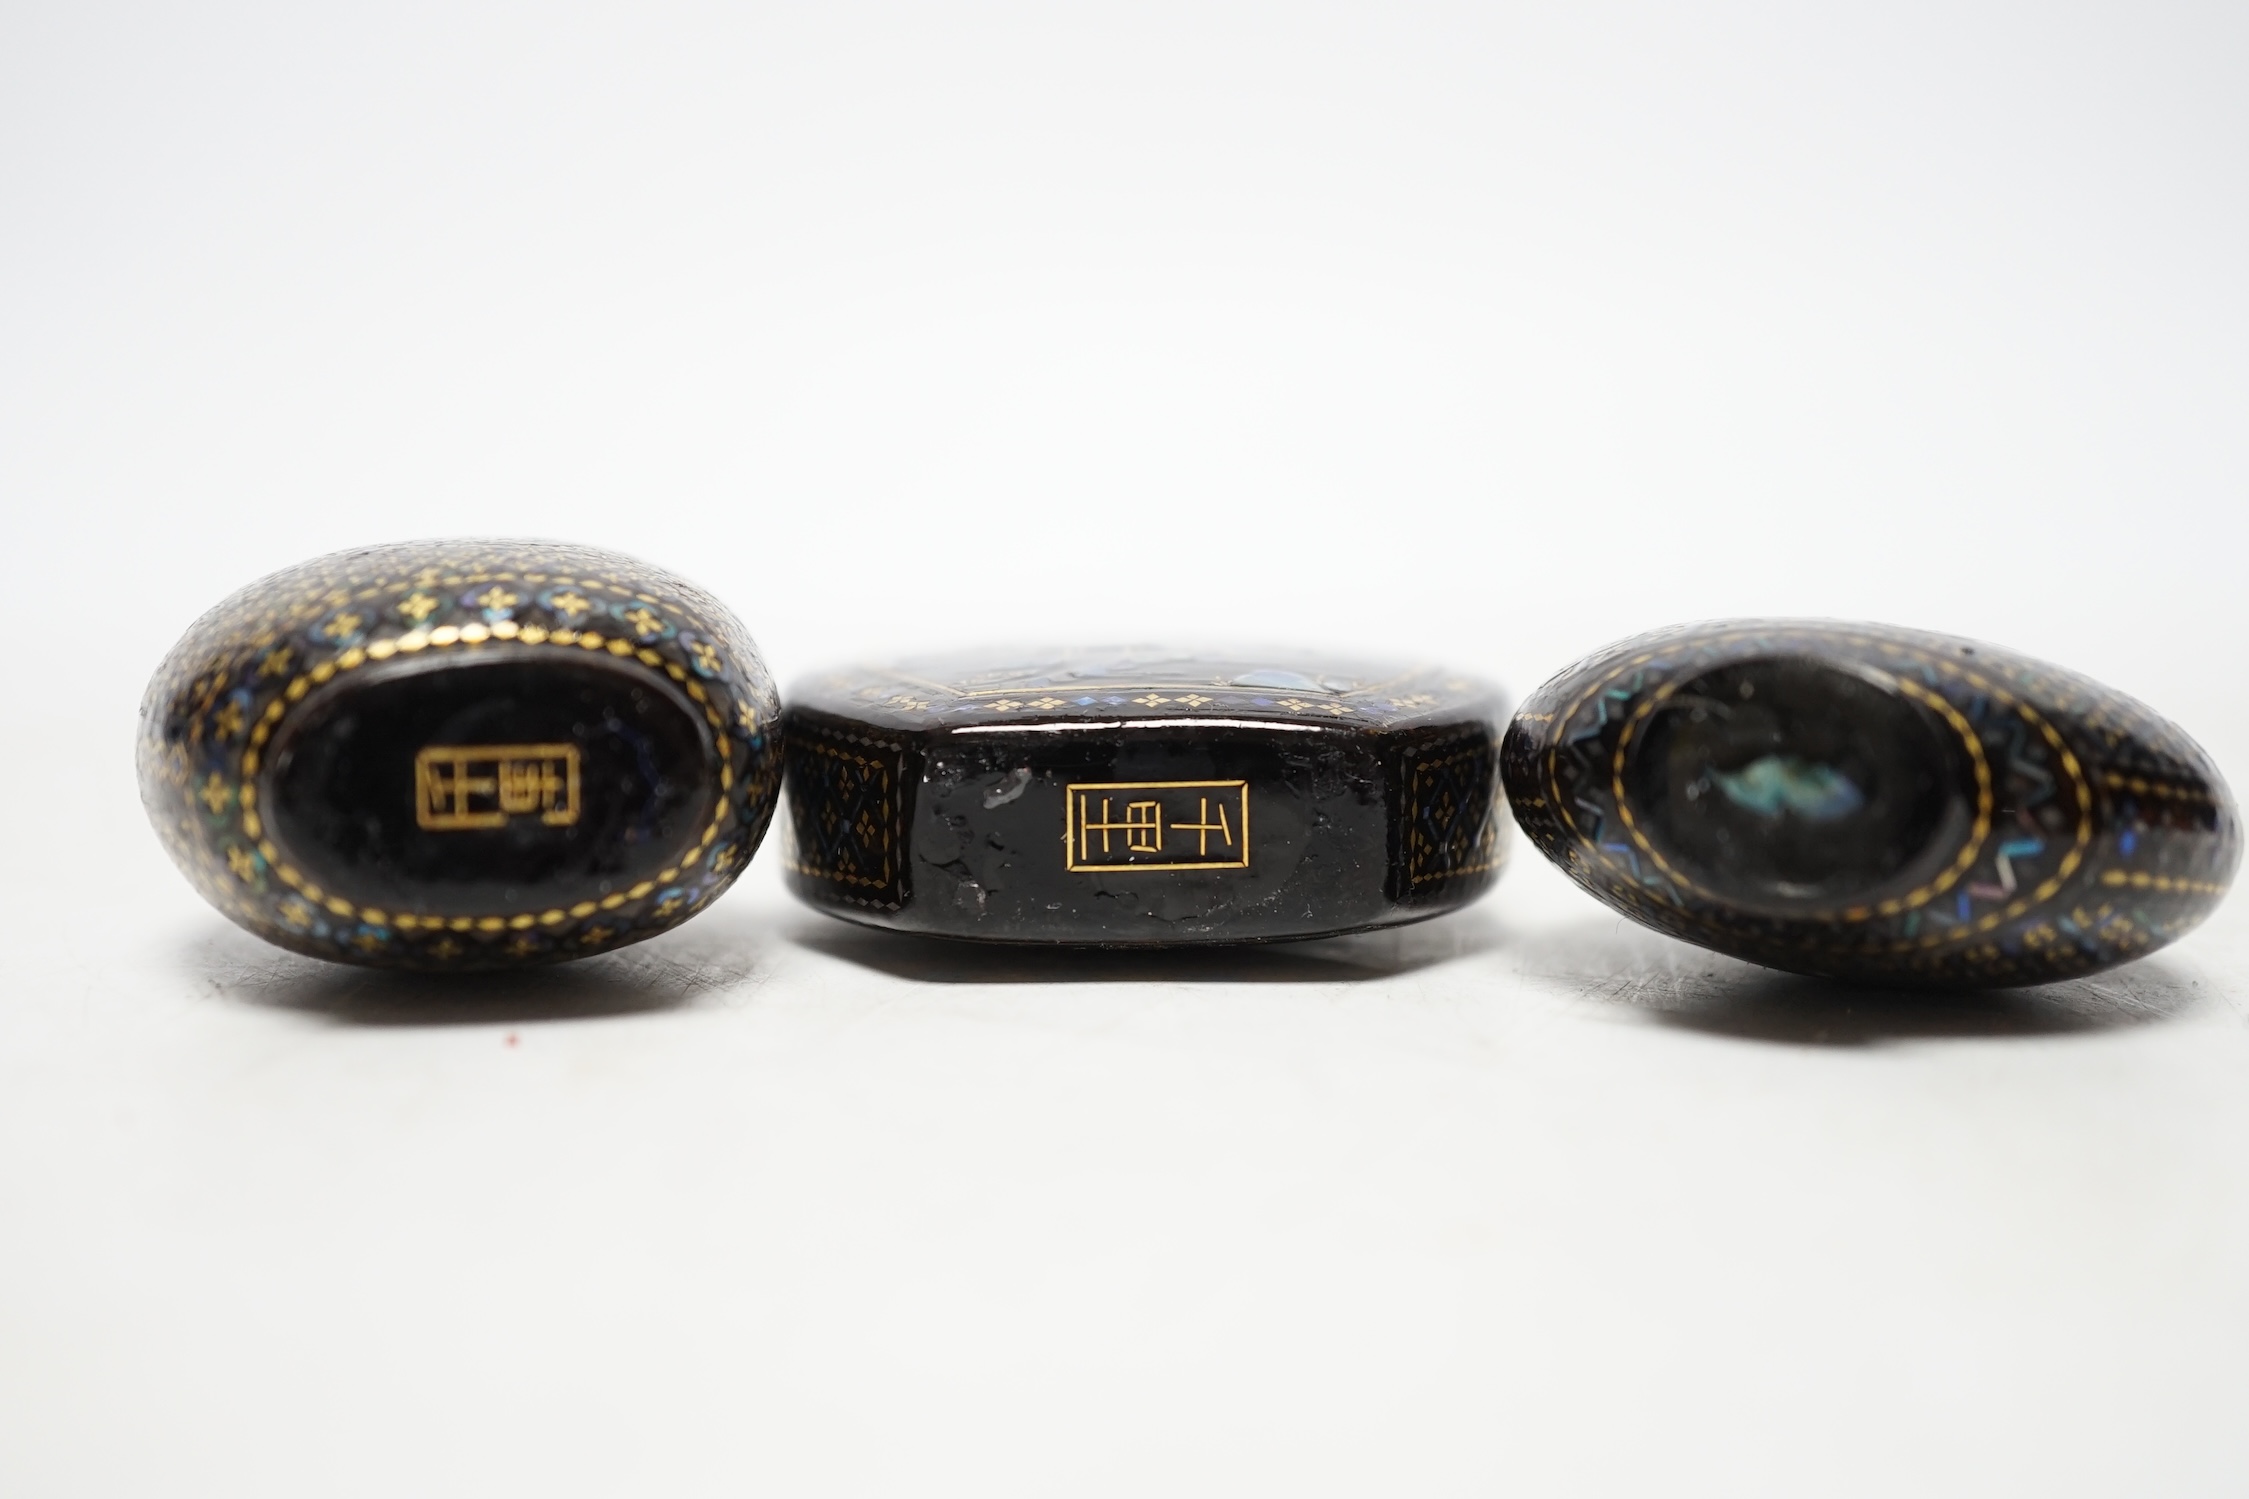 Three Chinese lac burgaute snuff bottles, 19th/20th century, largest 6cm high